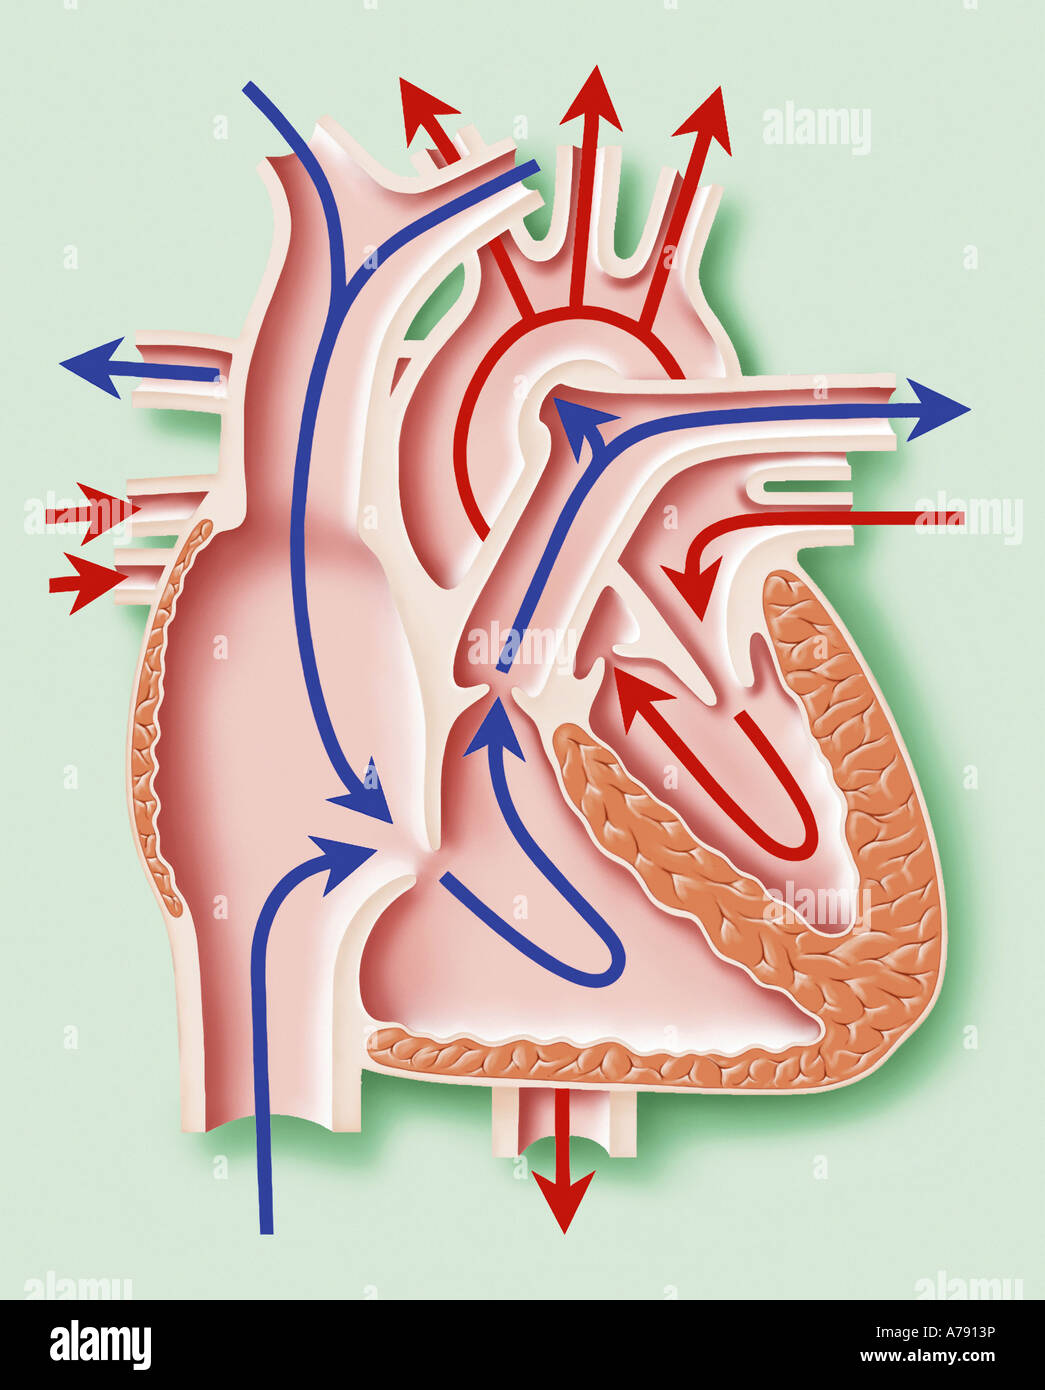 An illustration showing a cross section of the heart with the chambers and blood vessels and flow shown. Stock Photo